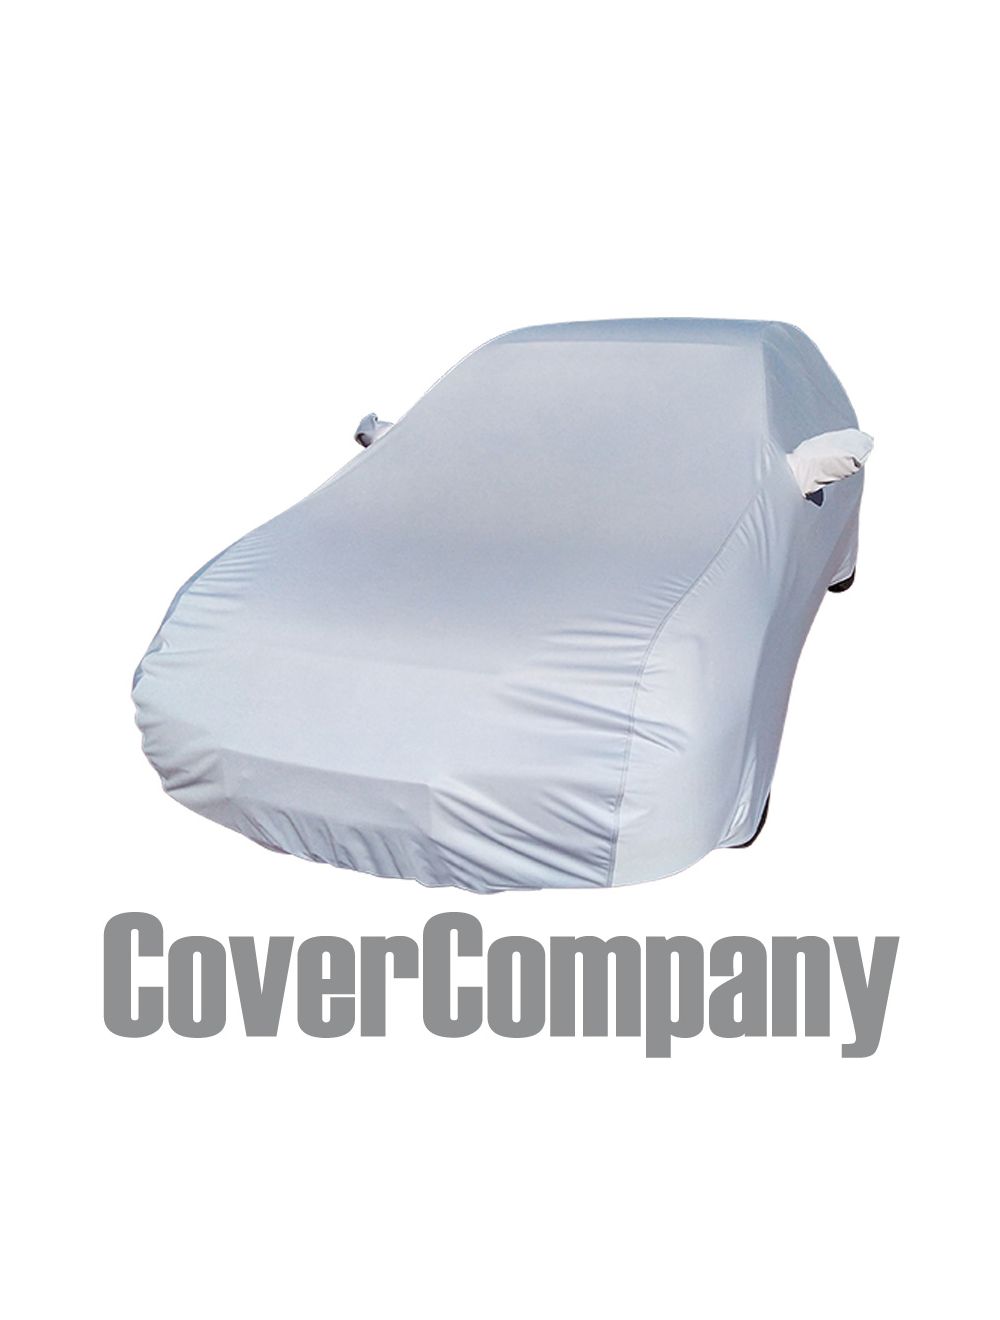 Tailored Vauxhall Outdoor Car Covers